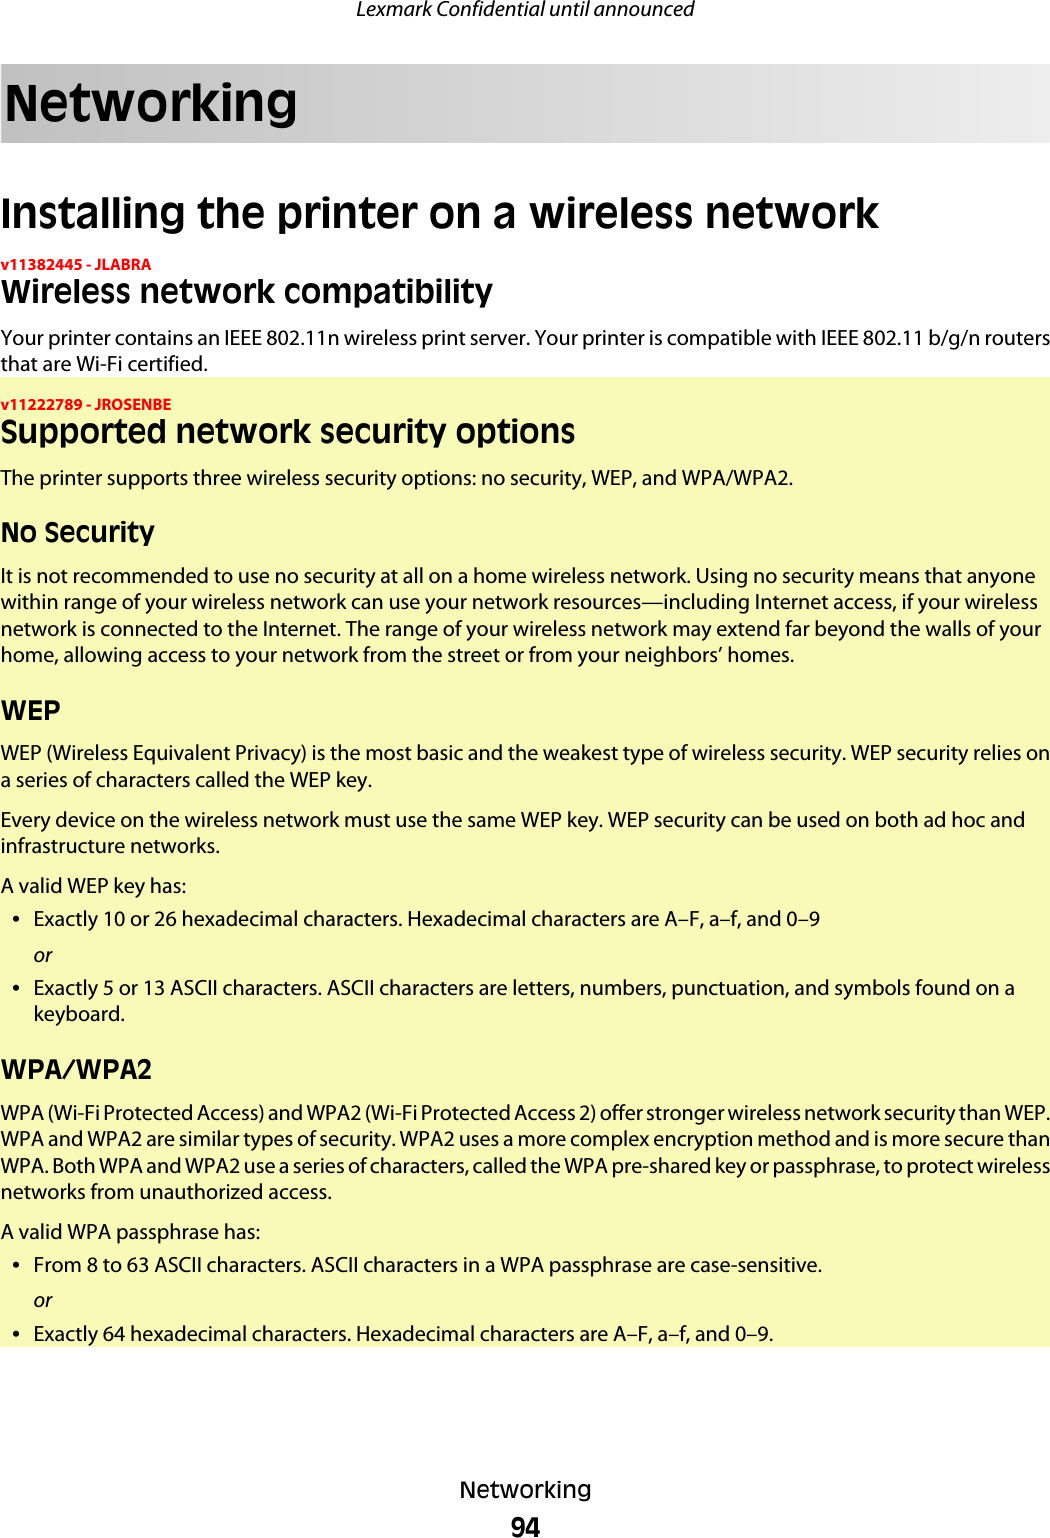 NetworkingInstalling the printer on a wireless networkv11382445 - JLABRAWireless network compatibilityYour printer contains an IEEE 802.11n wireless print server. Your printer is compatible with IEEE 802.11 b/g/n routersthat are Wi-Fi certified.v11222789 - JROSENBESupported network security optionsThe printer supports three wireless security options: no security, WEP, and WPA/WPA2.No SecurityIt is not recommended to use no security at all on a home wireless network. Using no security means that anyonewithin range of your wireless network can use your network resources—including Internet access, if your wirelessnetwork is connected to the Internet. The range of your wireless network may extend far beyond the walls of yourhome, allowing access to your network from the street or from your neighbors’ homes.WEPWEP (Wireless Equivalent Privacy) is the most basic and the weakest type of wireless security. WEP security relies ona series of characters called the WEP key.Every device on the wireless network must use the same WEP key. WEP security can be used on both ad hoc andinfrastructure networks.A valid WEP key has:•Exactly 10 or 26 hexadecimal characters. Hexadecimal characters are A–F, a–f, and 0–9or•Exactly 5 or 13 ASCII characters. ASCII characters are letters, numbers, punctuation, and symbols found on akeyboard.WPA/WPA2WPA (Wi-Fi Protected Access) and WPA2 (Wi-Fi Protected Access 2) offer stronger wireless network security than WEP.WPA and WPA2 are similar types of security. WPA2 uses a more complex encryption method and is more secure thanWPA. Both WPA and WPA2 use a series of characters, called the WPA pre-shared key or passphrase, to protect wirelessnetworks from unauthorized access.A valid WPA passphrase has:•From 8 to 63 ASCII characters. ASCII characters in a WPA passphrase are case-sensitive.or•Exactly 64 hexadecimal characters. Hexadecimal characters are A–F, a–f, and 0–9.Lexmark Confidential until announcedNetworking94